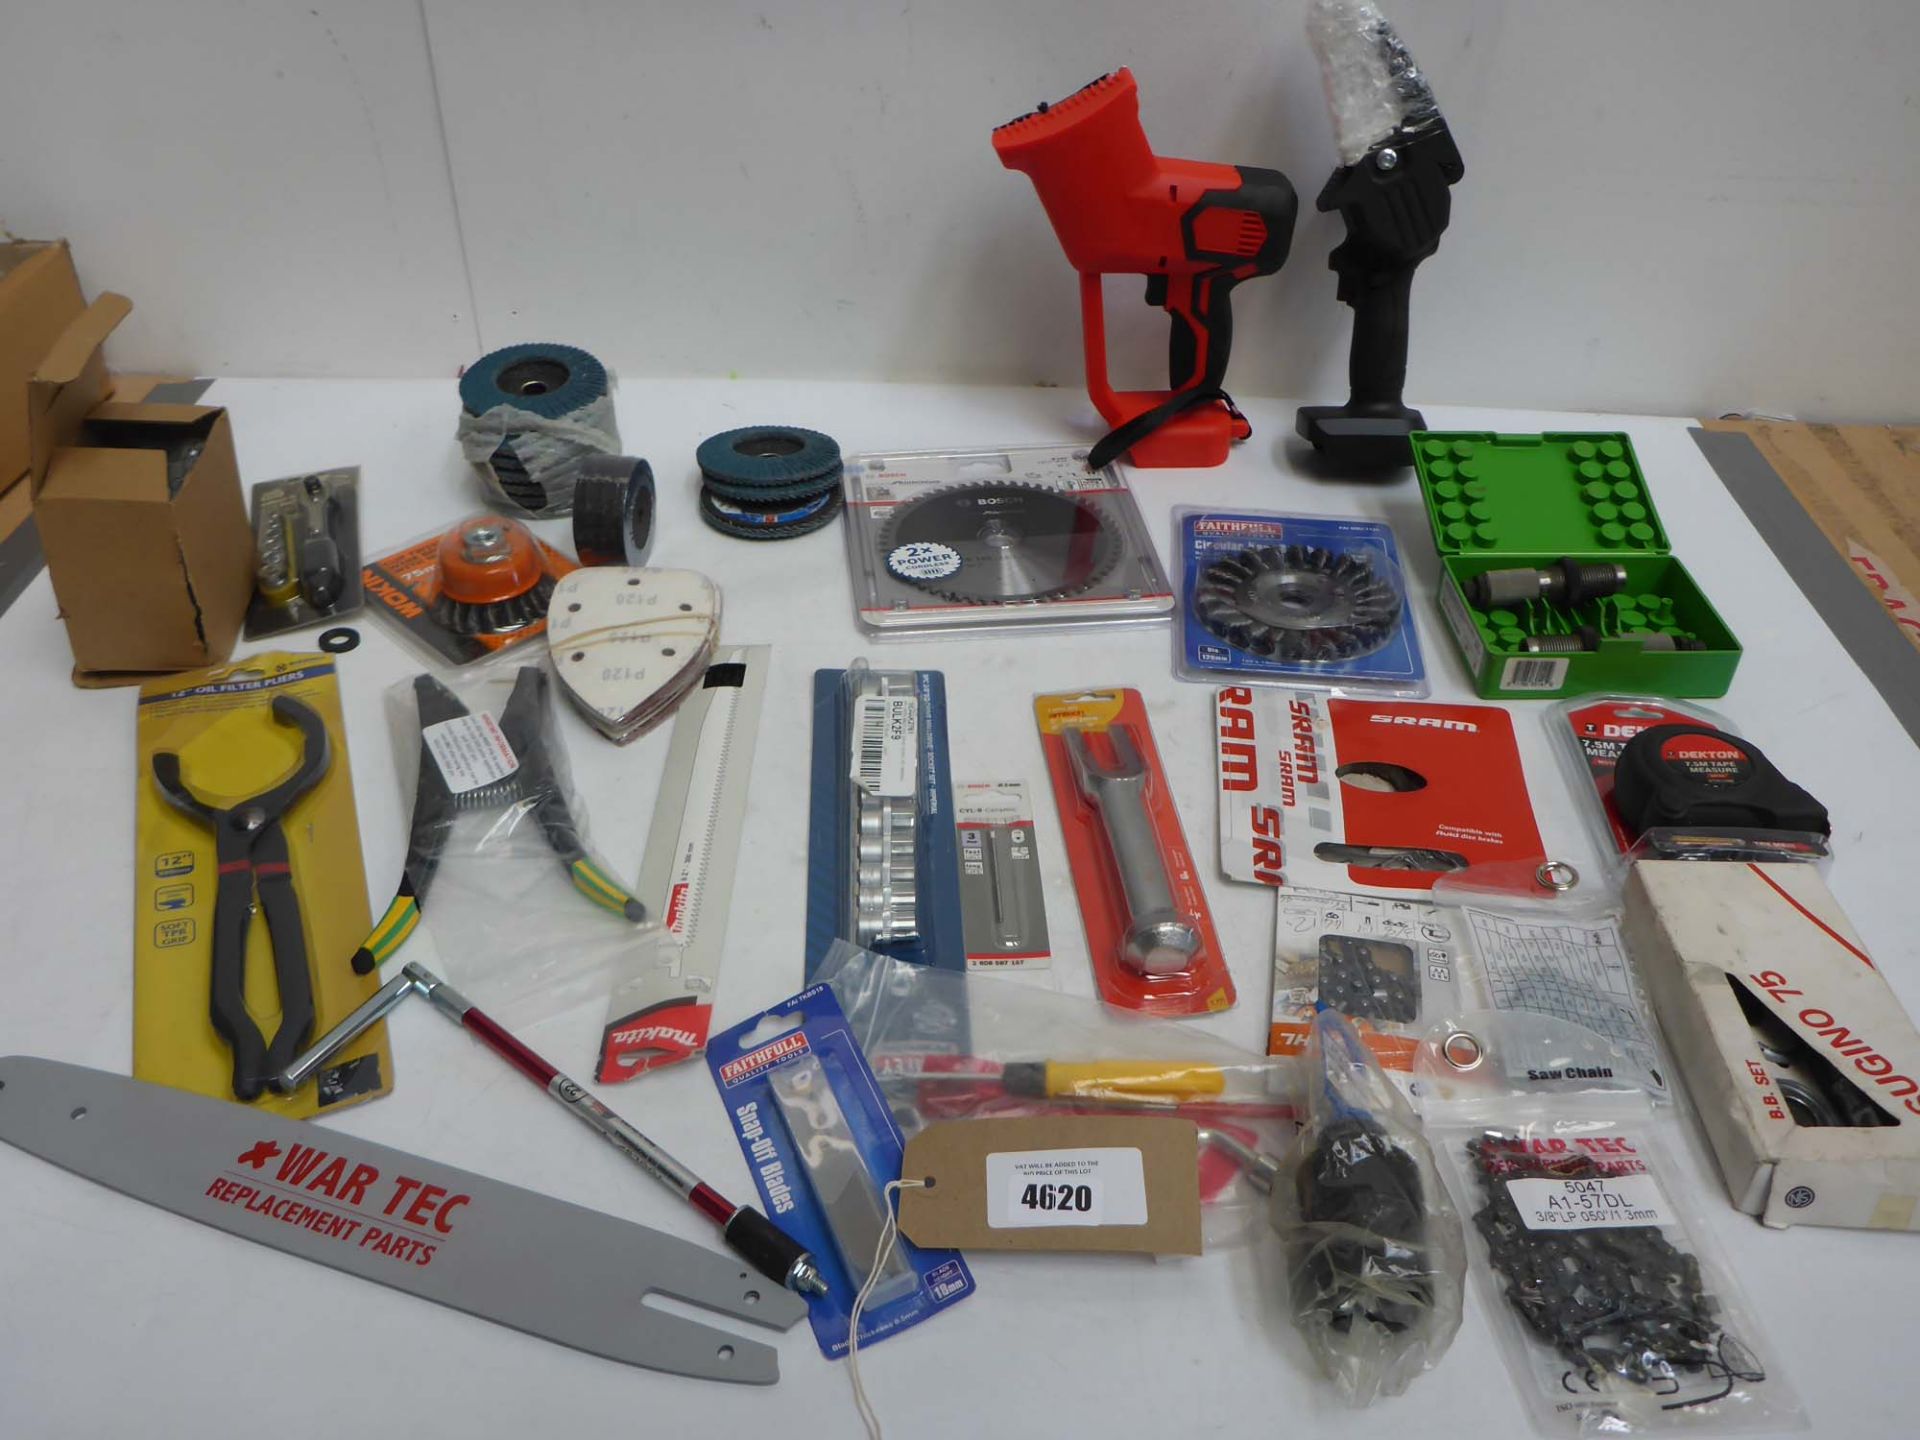 Oil filter pliers, sockets, joint splitter, sanding & cutting discs, chainsaw chains, tape